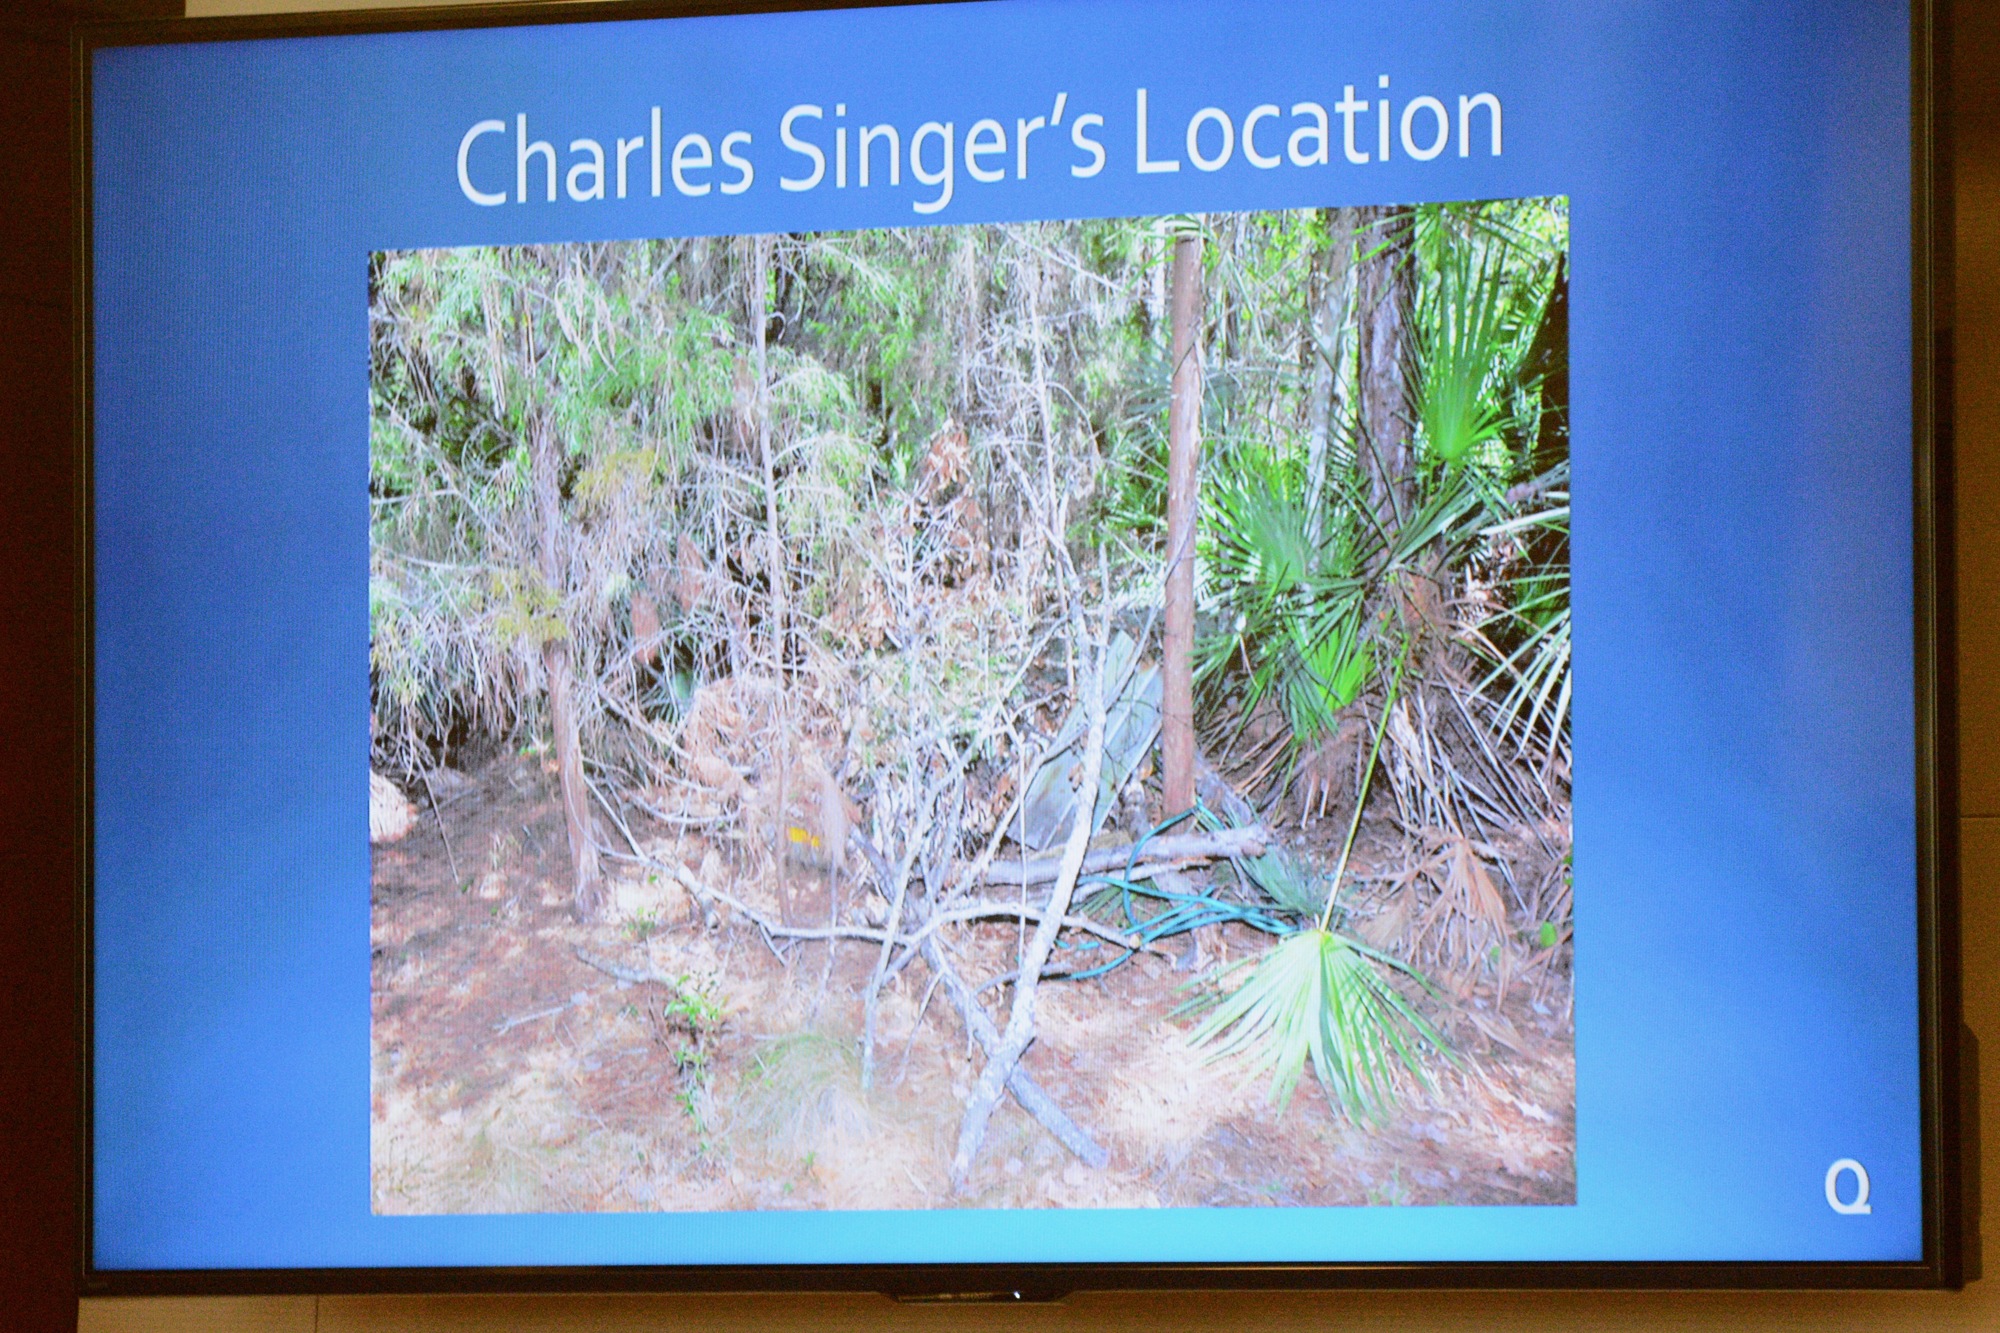 A prosecution presentation slide showed the overturned jon boat and pile of brush under which detectives found Charles Singer's  body.